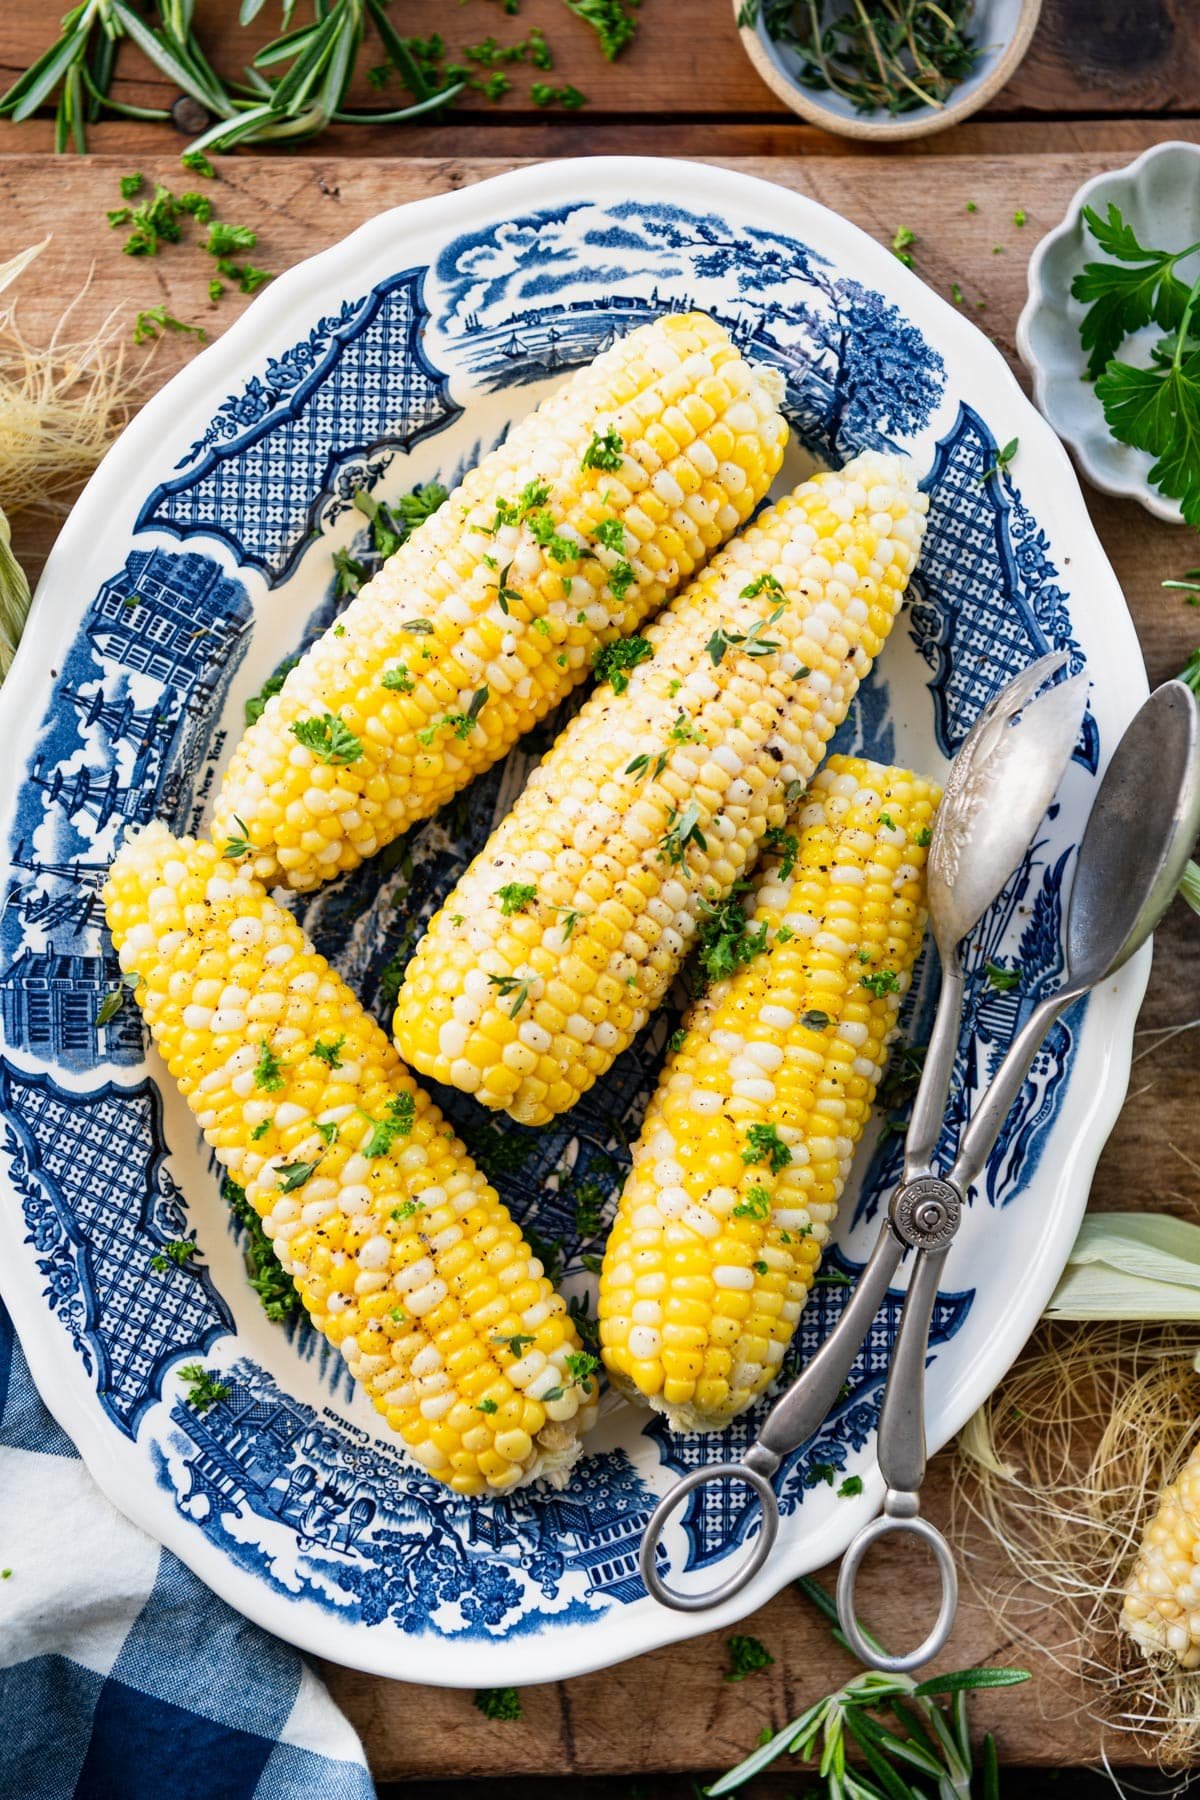 Platter of corn on the cob with butter, salt, pepper, garlic, and herbs.